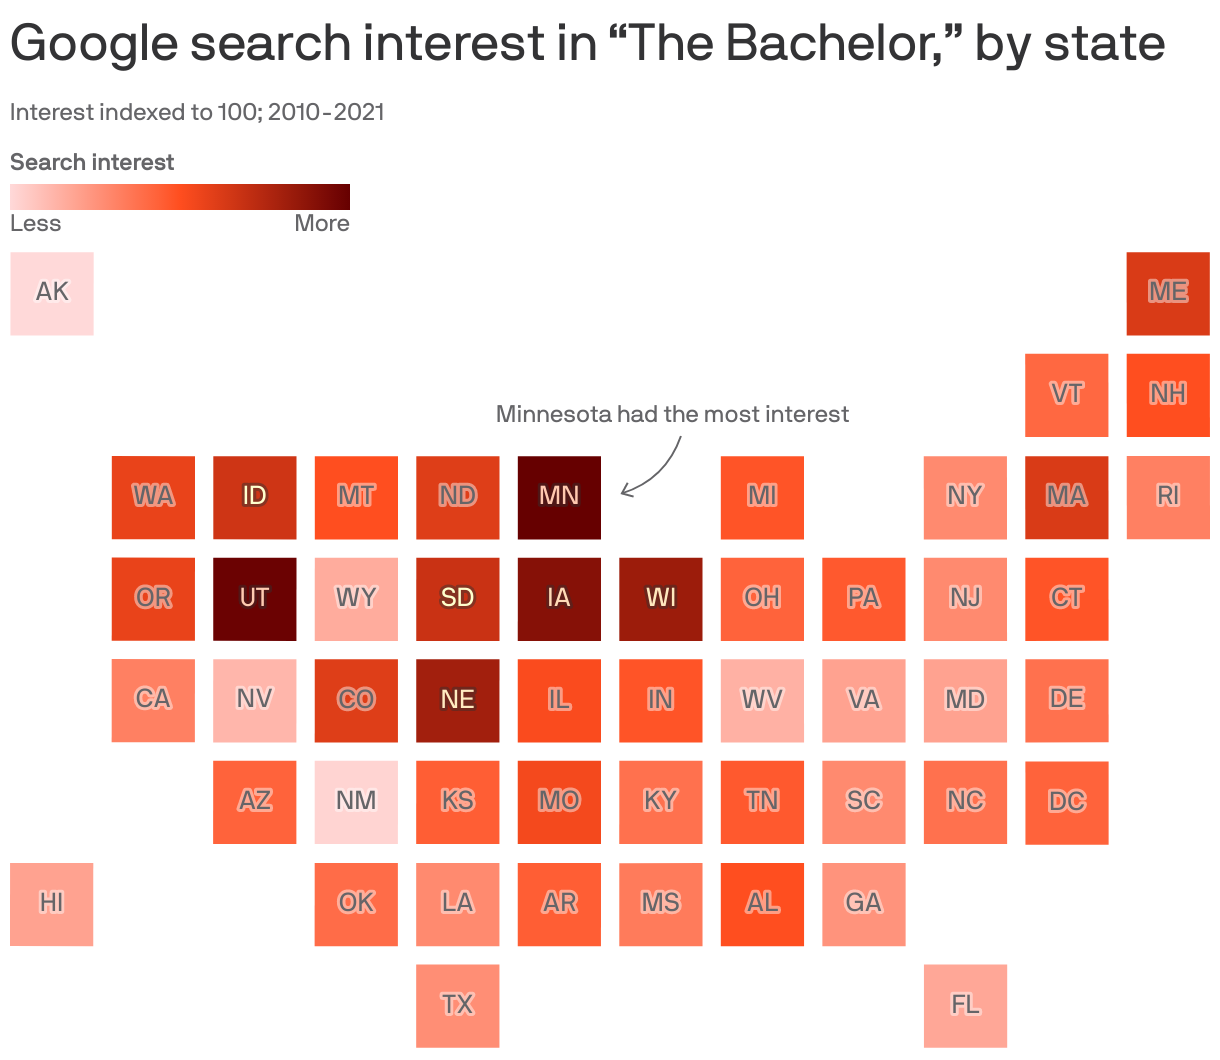 Google search interest in “The Bachelor”, by state